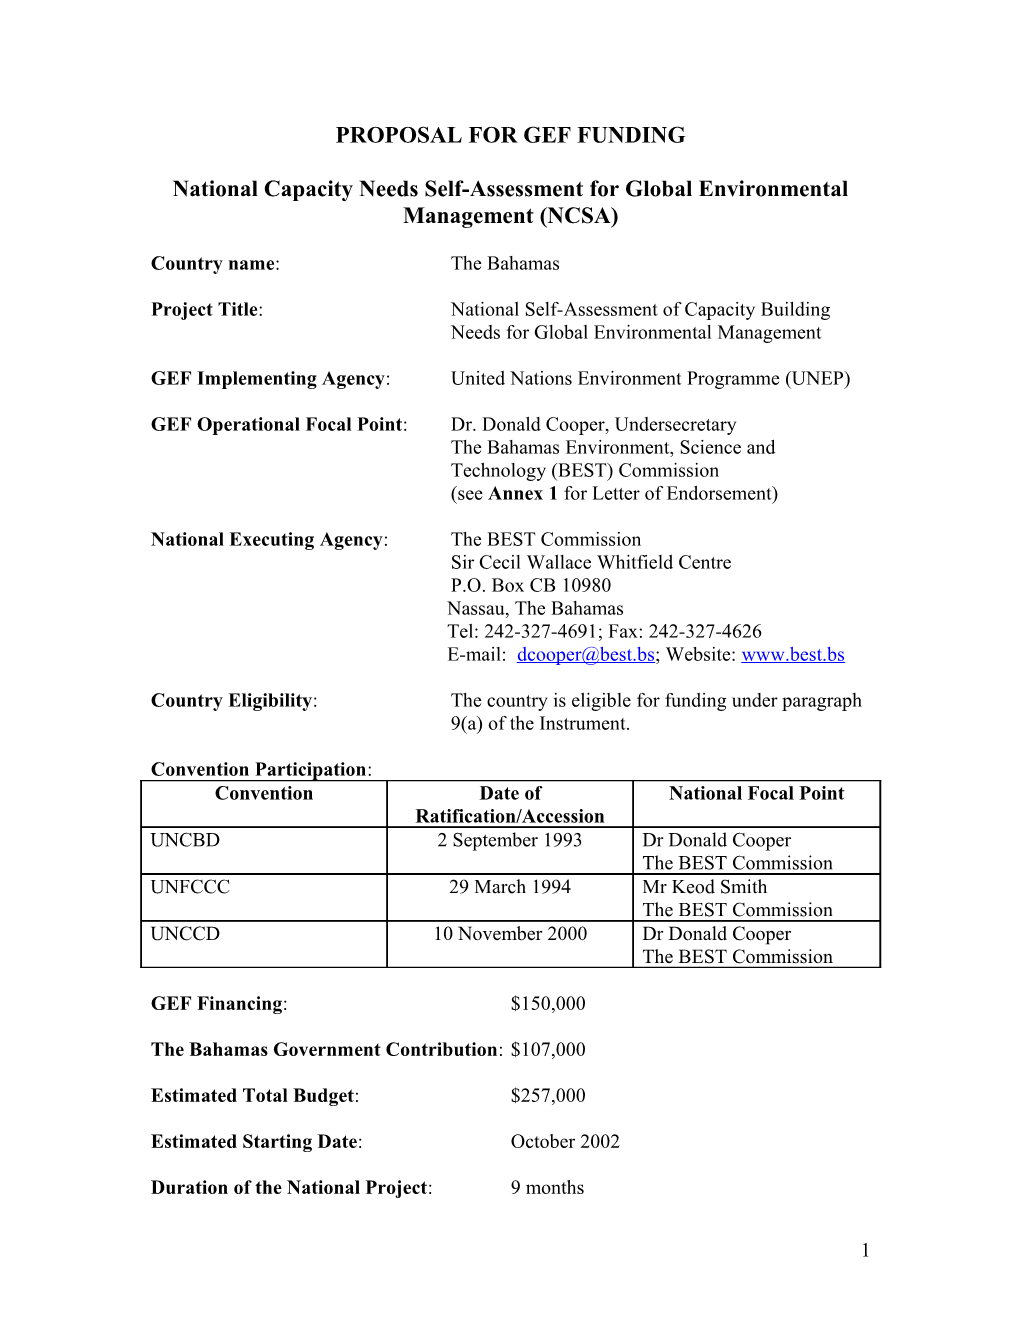 Project Proposal for National Self-Assessment of Capacity Needs for Global Environmental